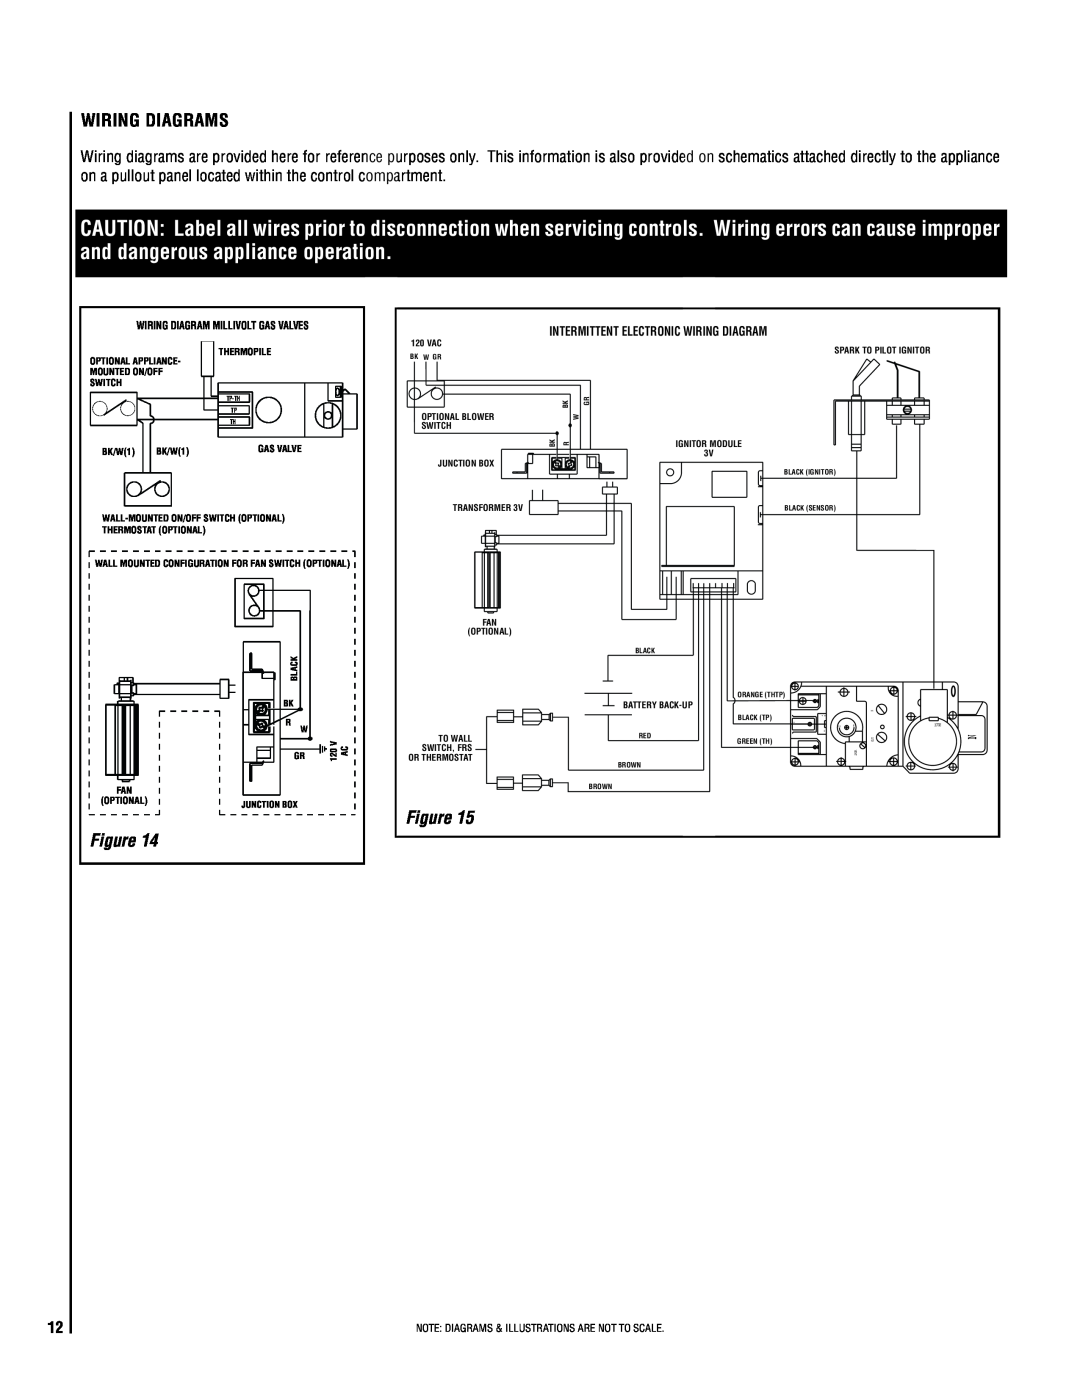 TOA Electronics SLDVT-40, SLDVT-35 manual Wiring Diagrams, Note Diagrams & Illustrations Are Not To Scale 